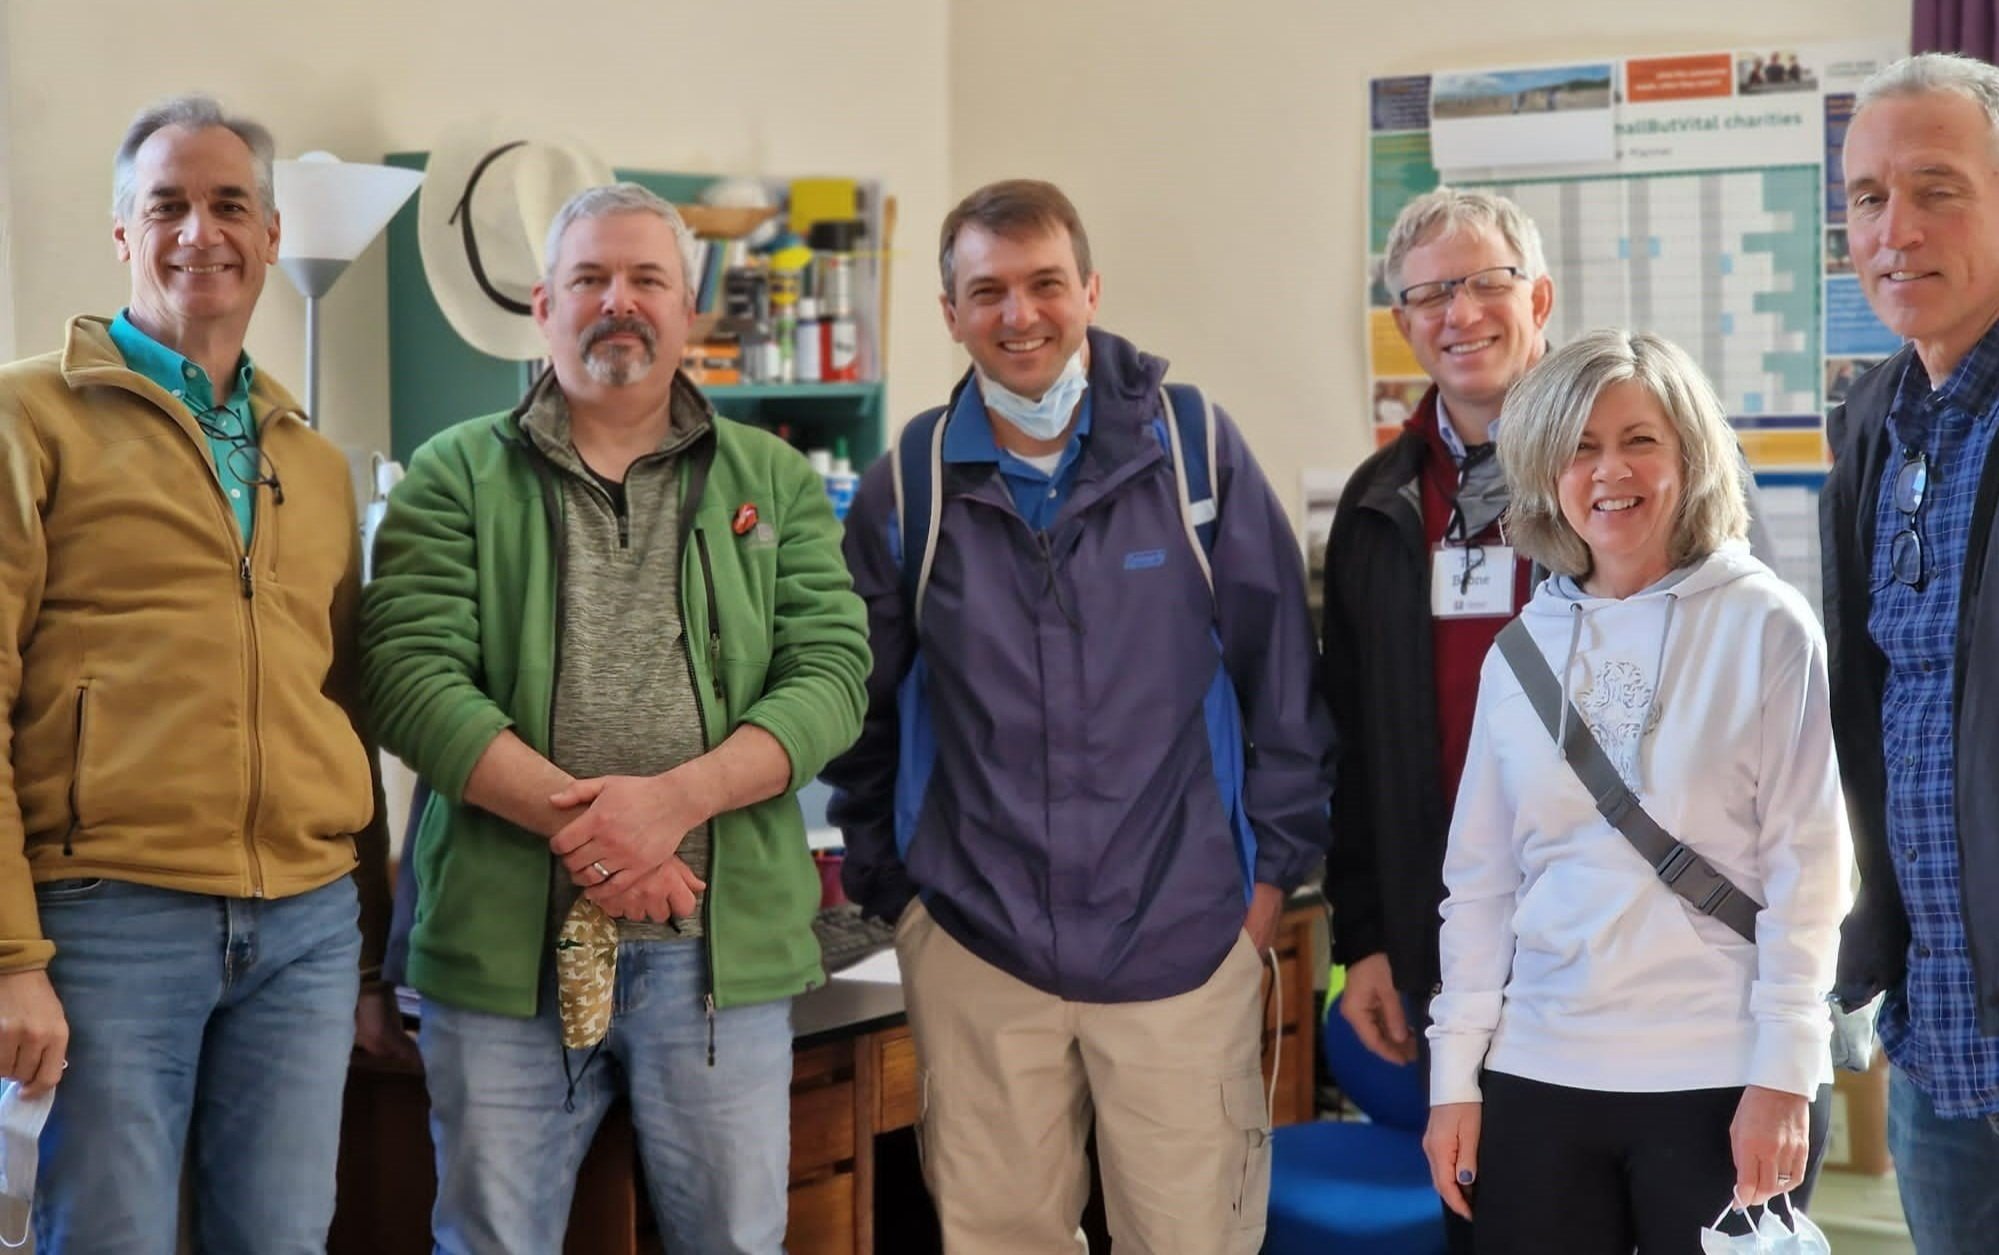   Ewan Roberts, Centre Manager of Asylum Link, meets with part of The Outreach Foundation team  